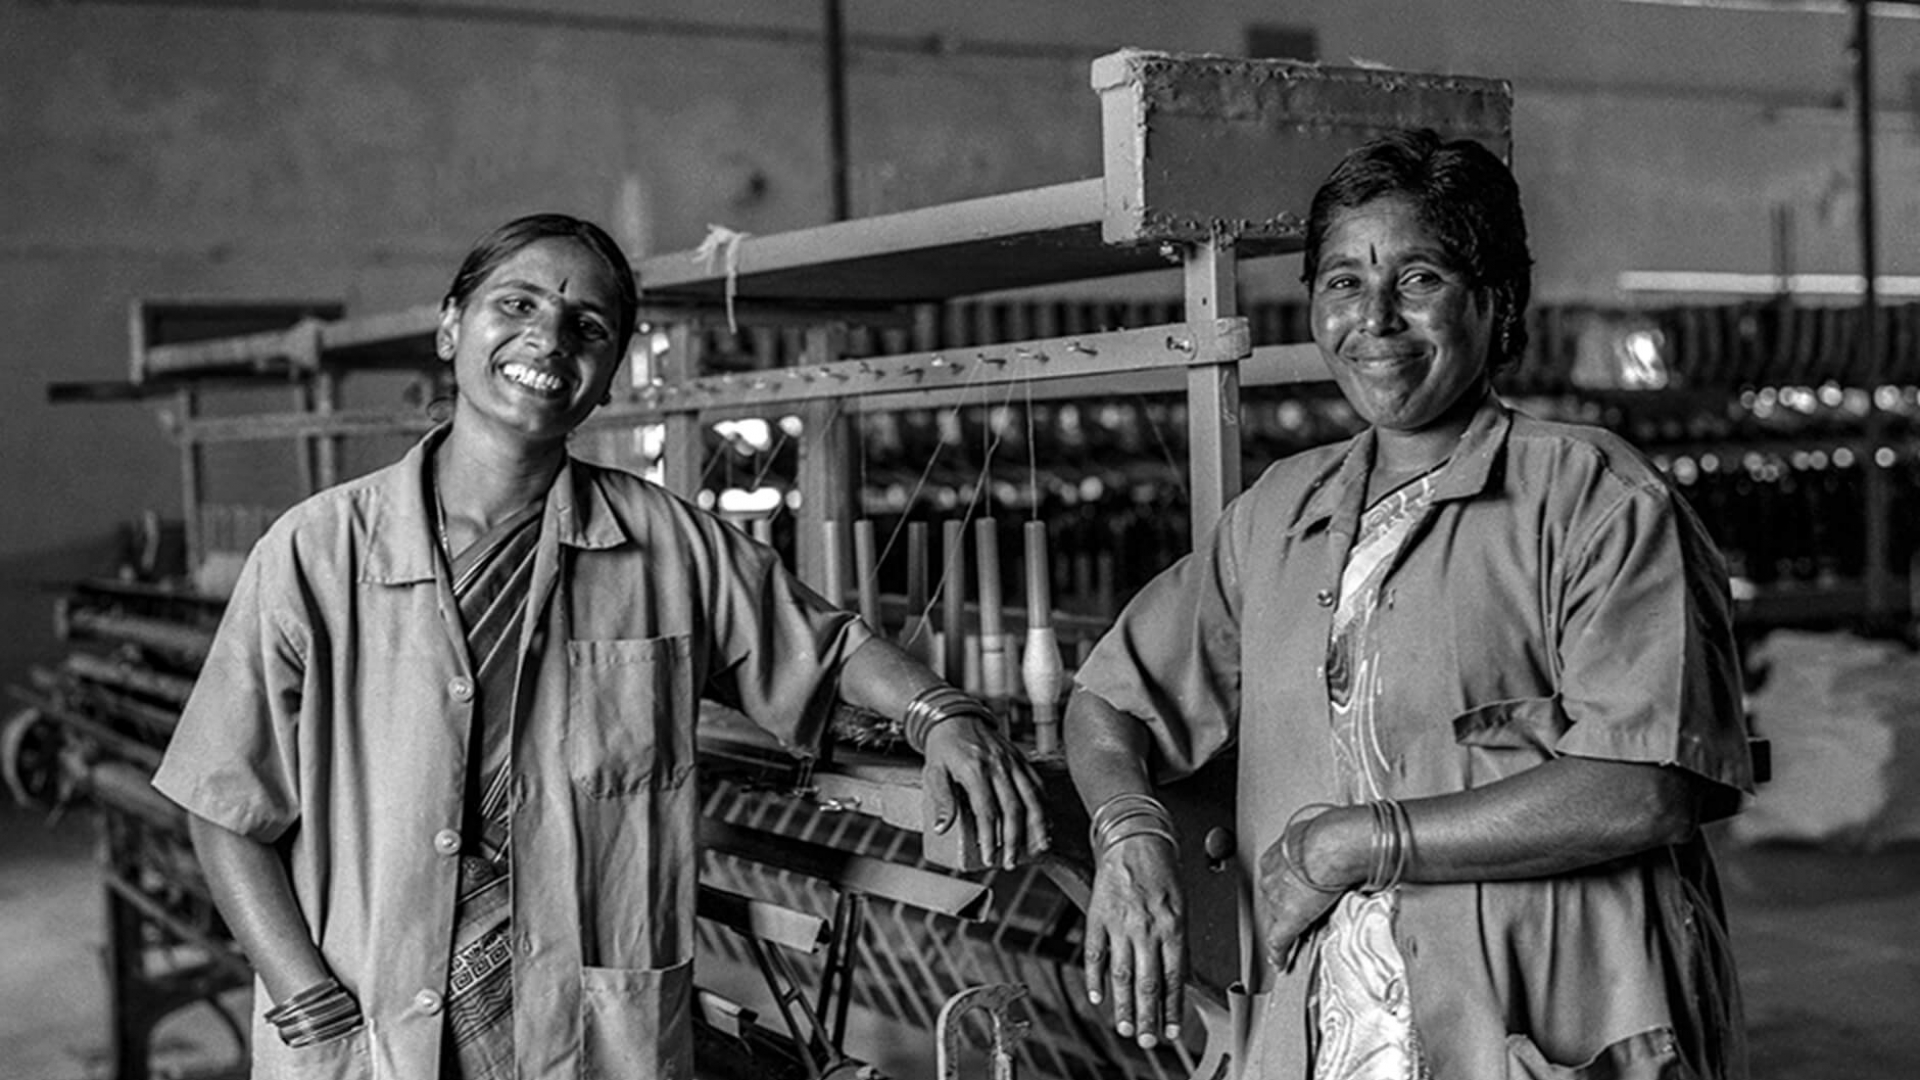 Two Indian craftspeople in front of textile manufacturing machine.